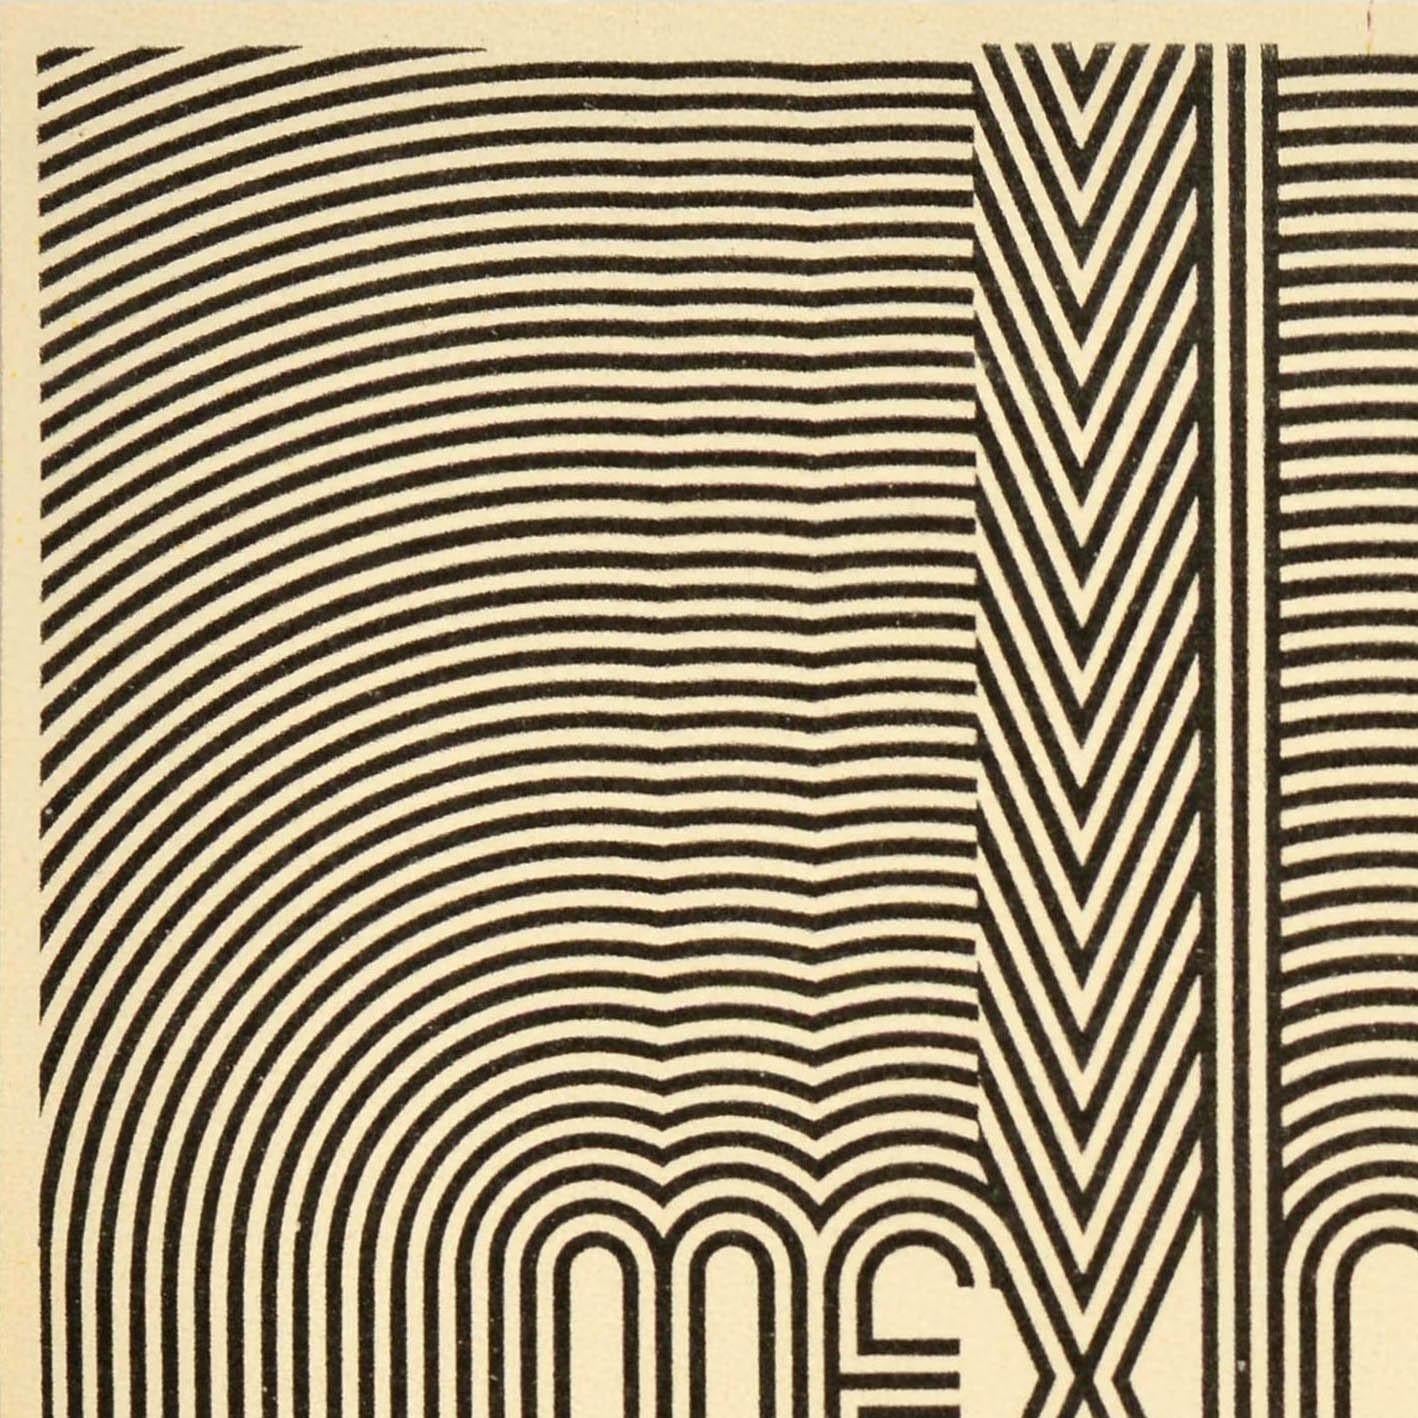 Original vintage sport poster for 1968 Mexico Olympic Games officially known as the Games of the XIX Olympiad held from 12-27 October 1968, featuring the iconic eye-catching event logo design by the notable American graphic designer Lance Wyman (b.